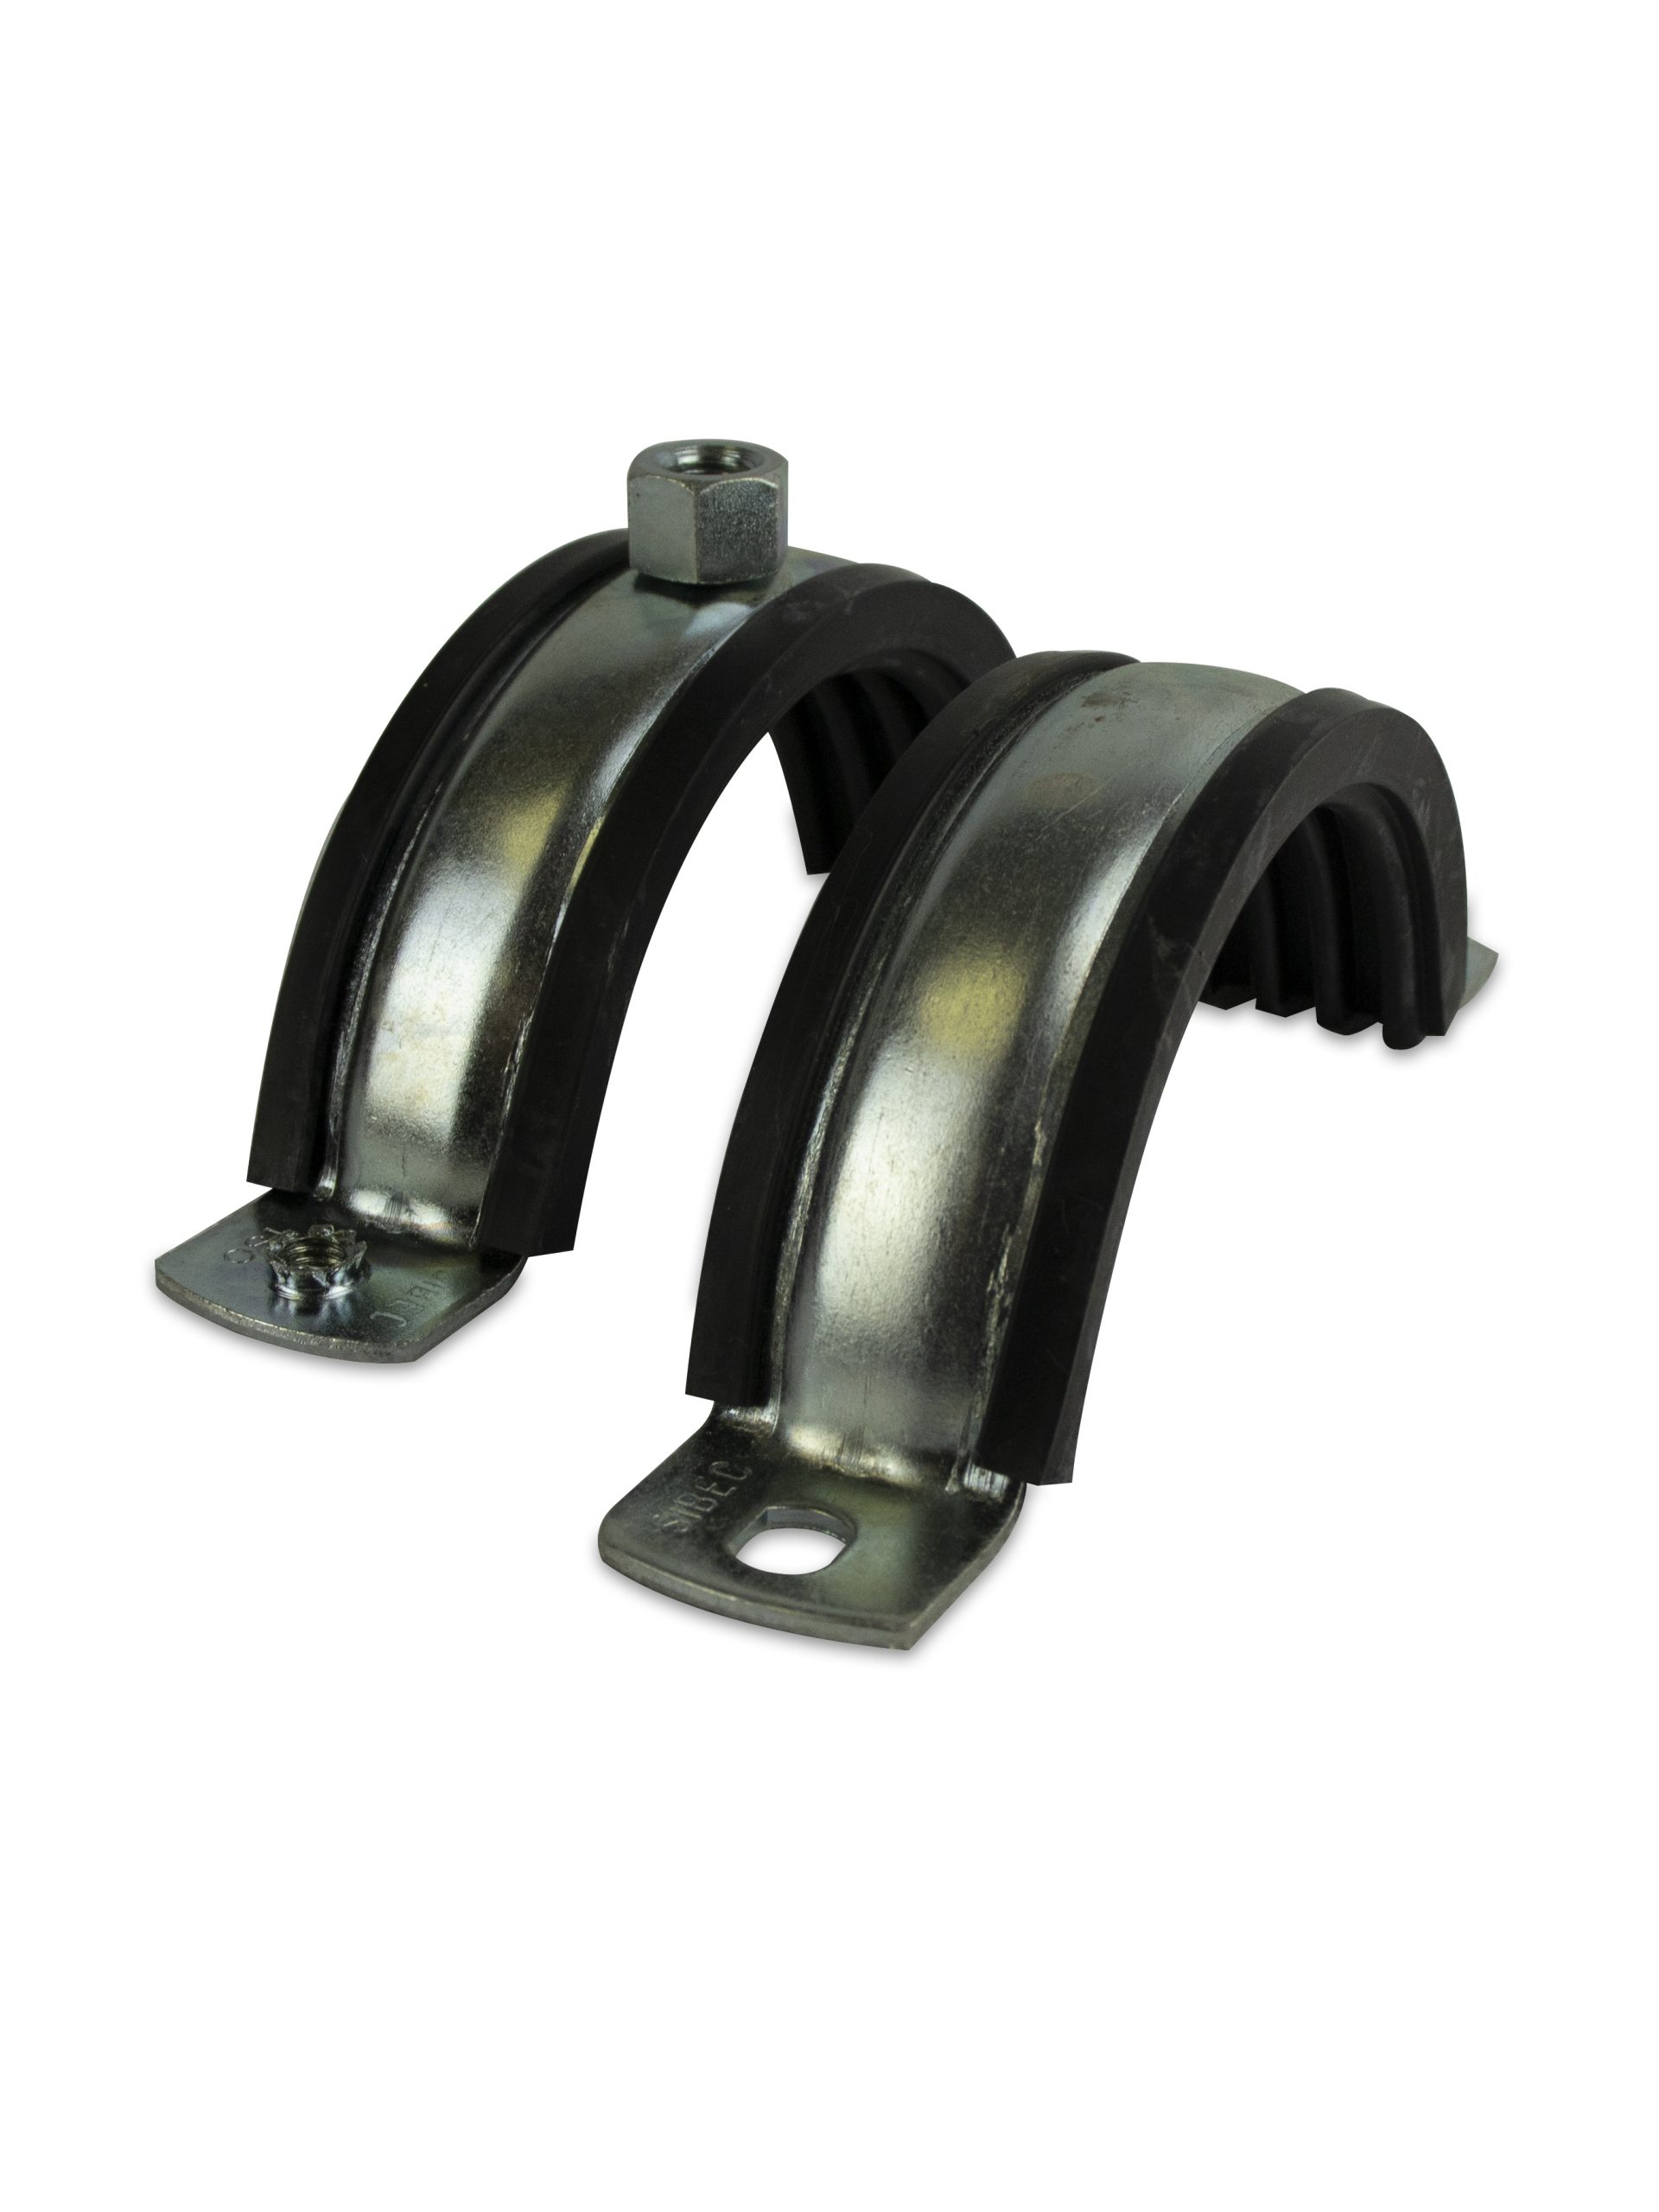 RUBBER CLAMP  2 1/2 Inches from Gas Equipment Company Llc Abu Dhabi, UNITED ARAB EMIRATES